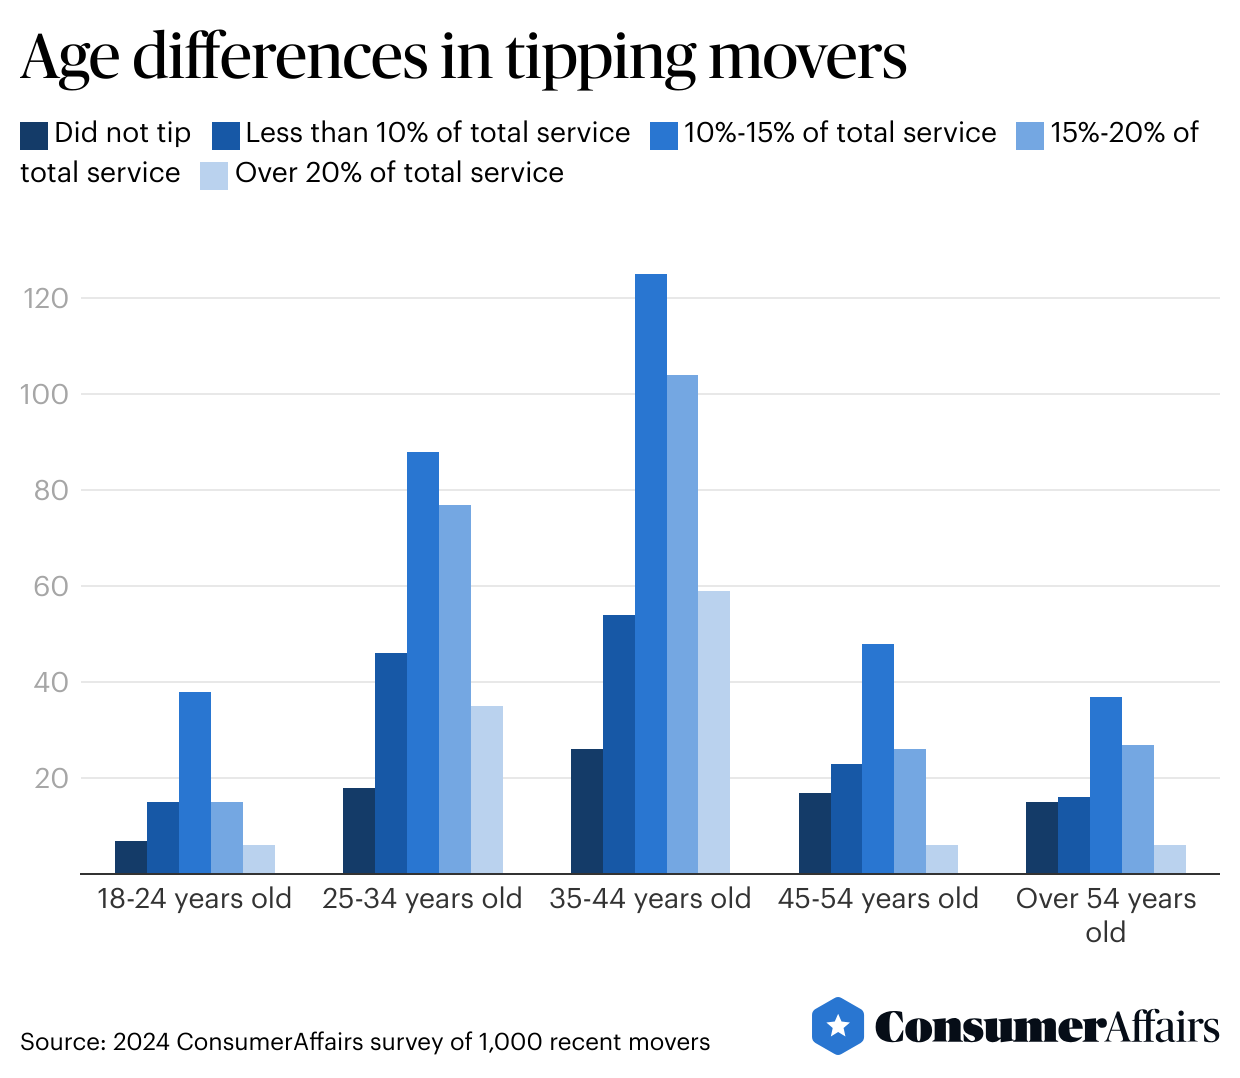 A graph showing results to "Age differences in tipping movers".